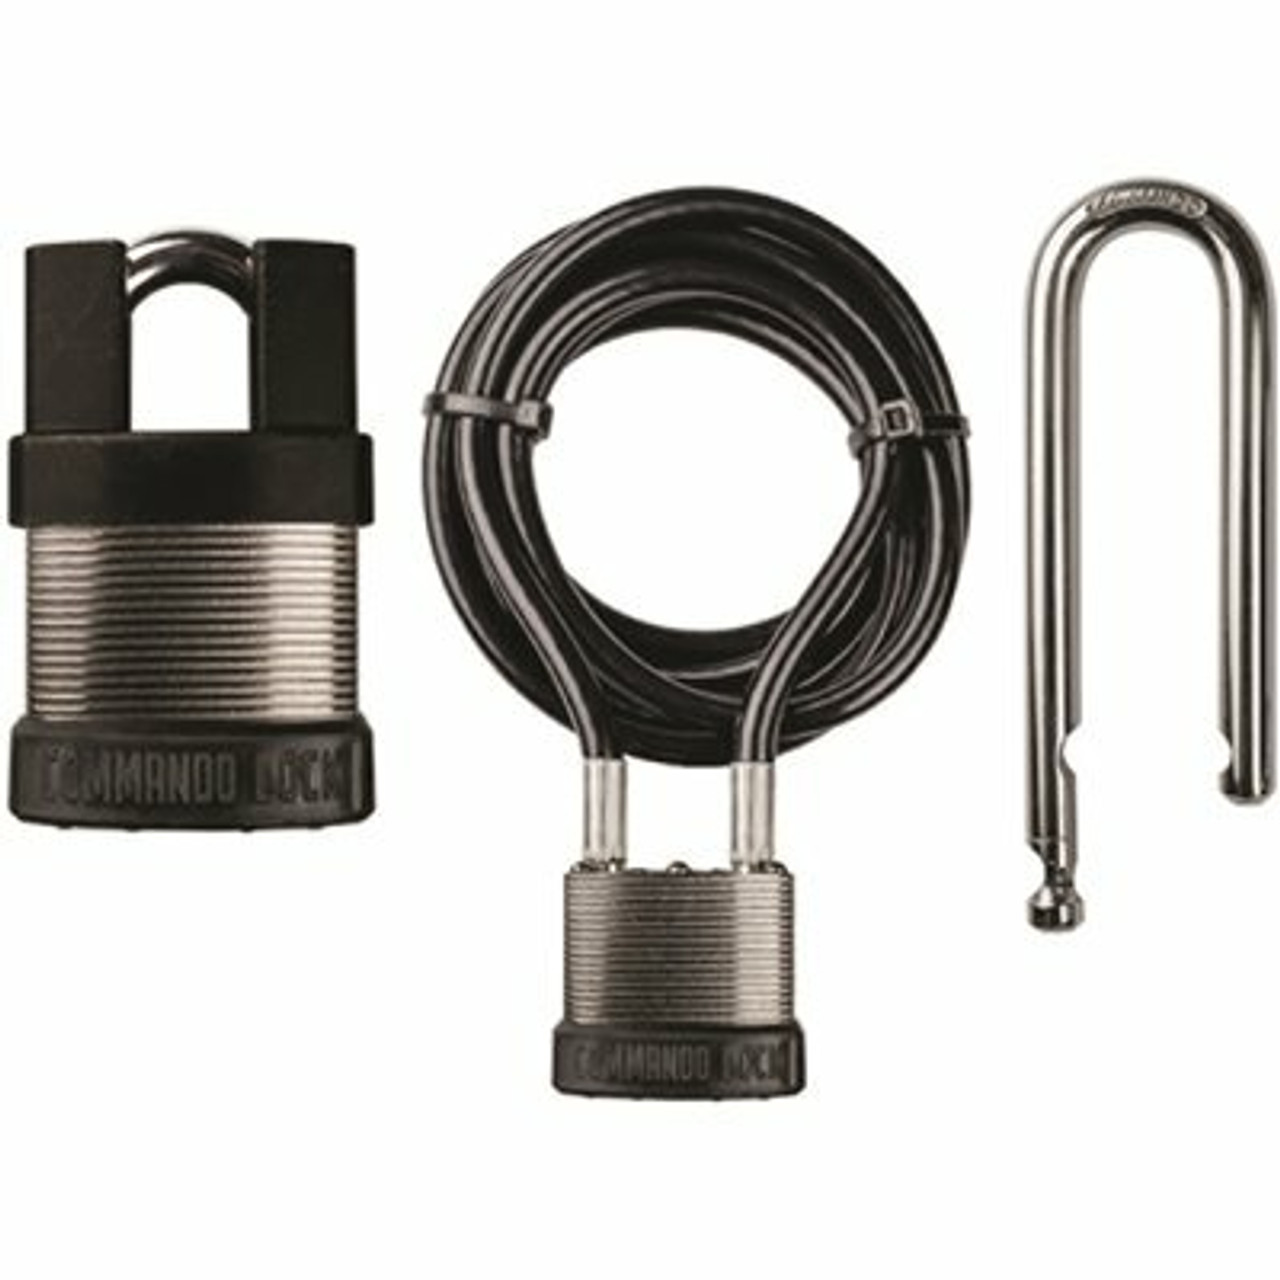 Commando Lock Ichange 4-In-1 System Steel Keyed Padlock Starter Kit With 1-Lock, 2-Shackles, Guard And 8 Ft. Cable